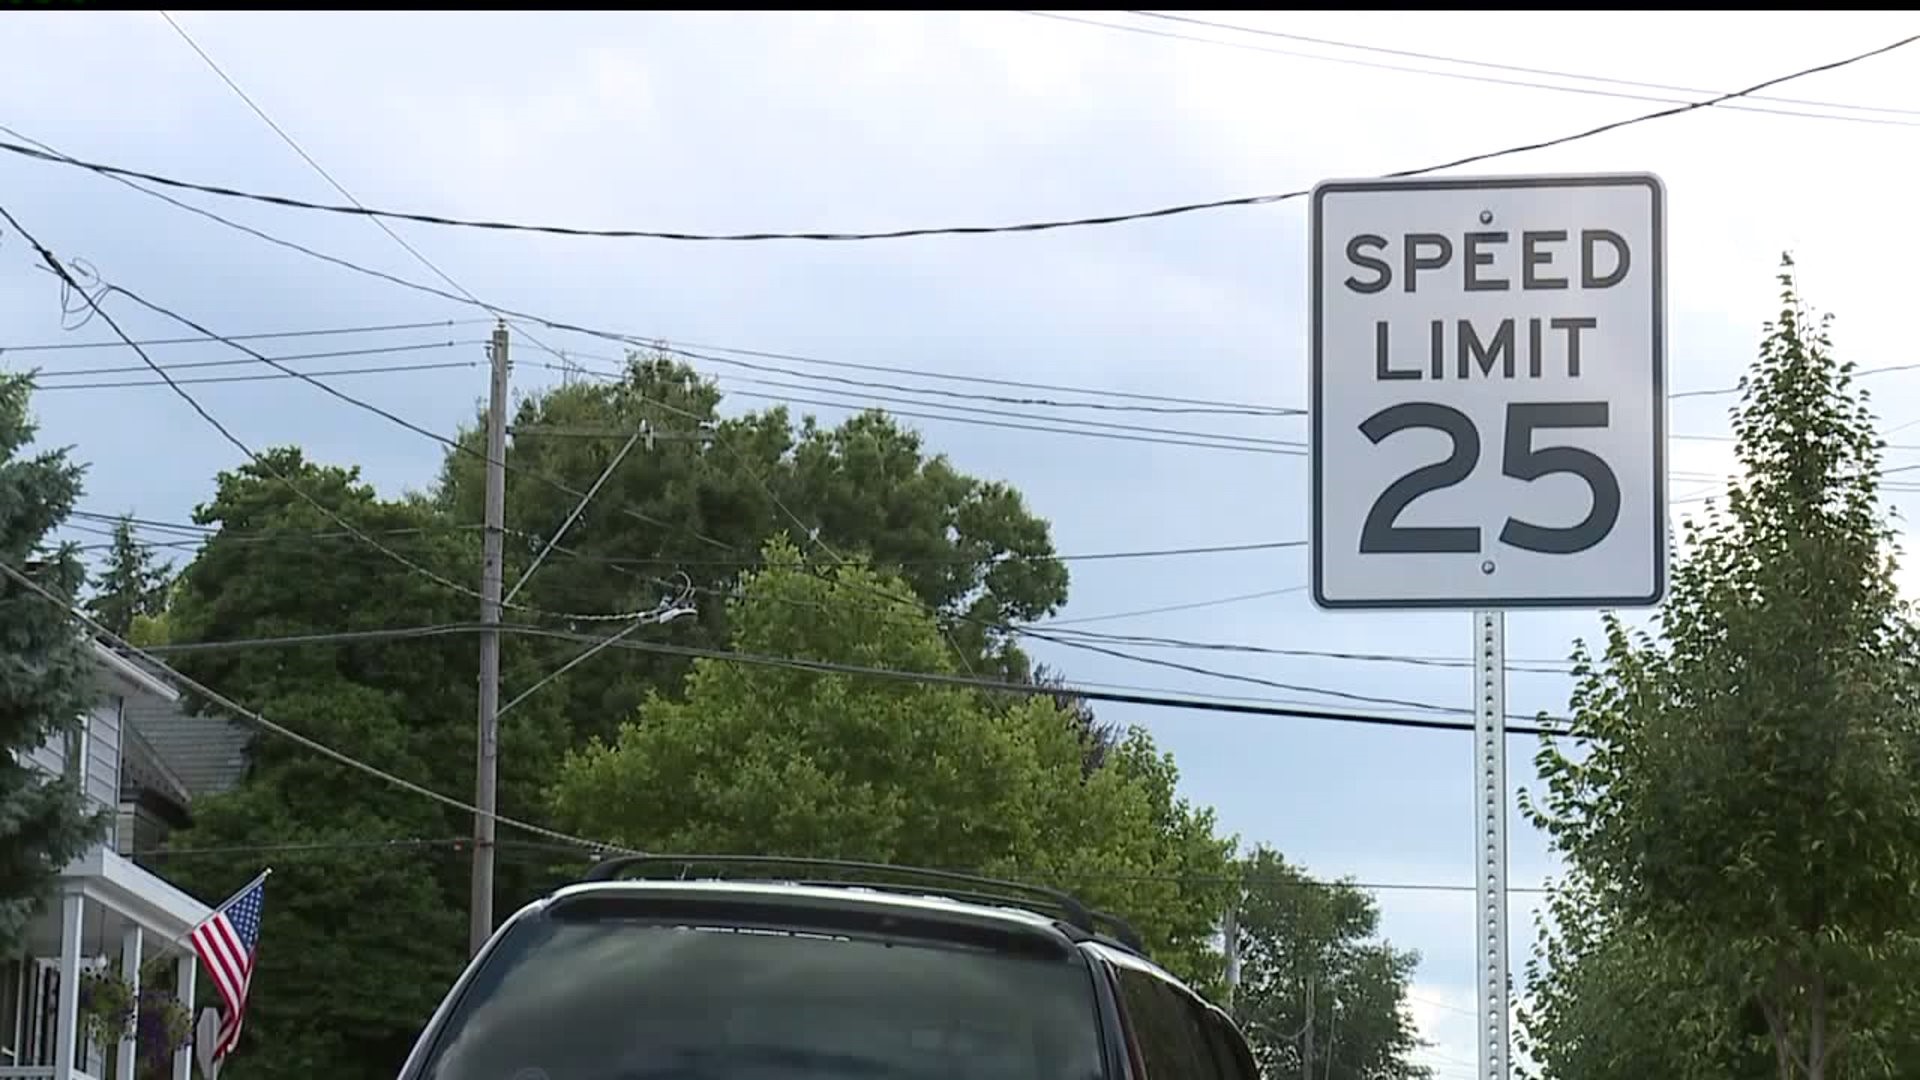 New speed limit signs in Wrightsville irk some people, others say action is needed against speeding